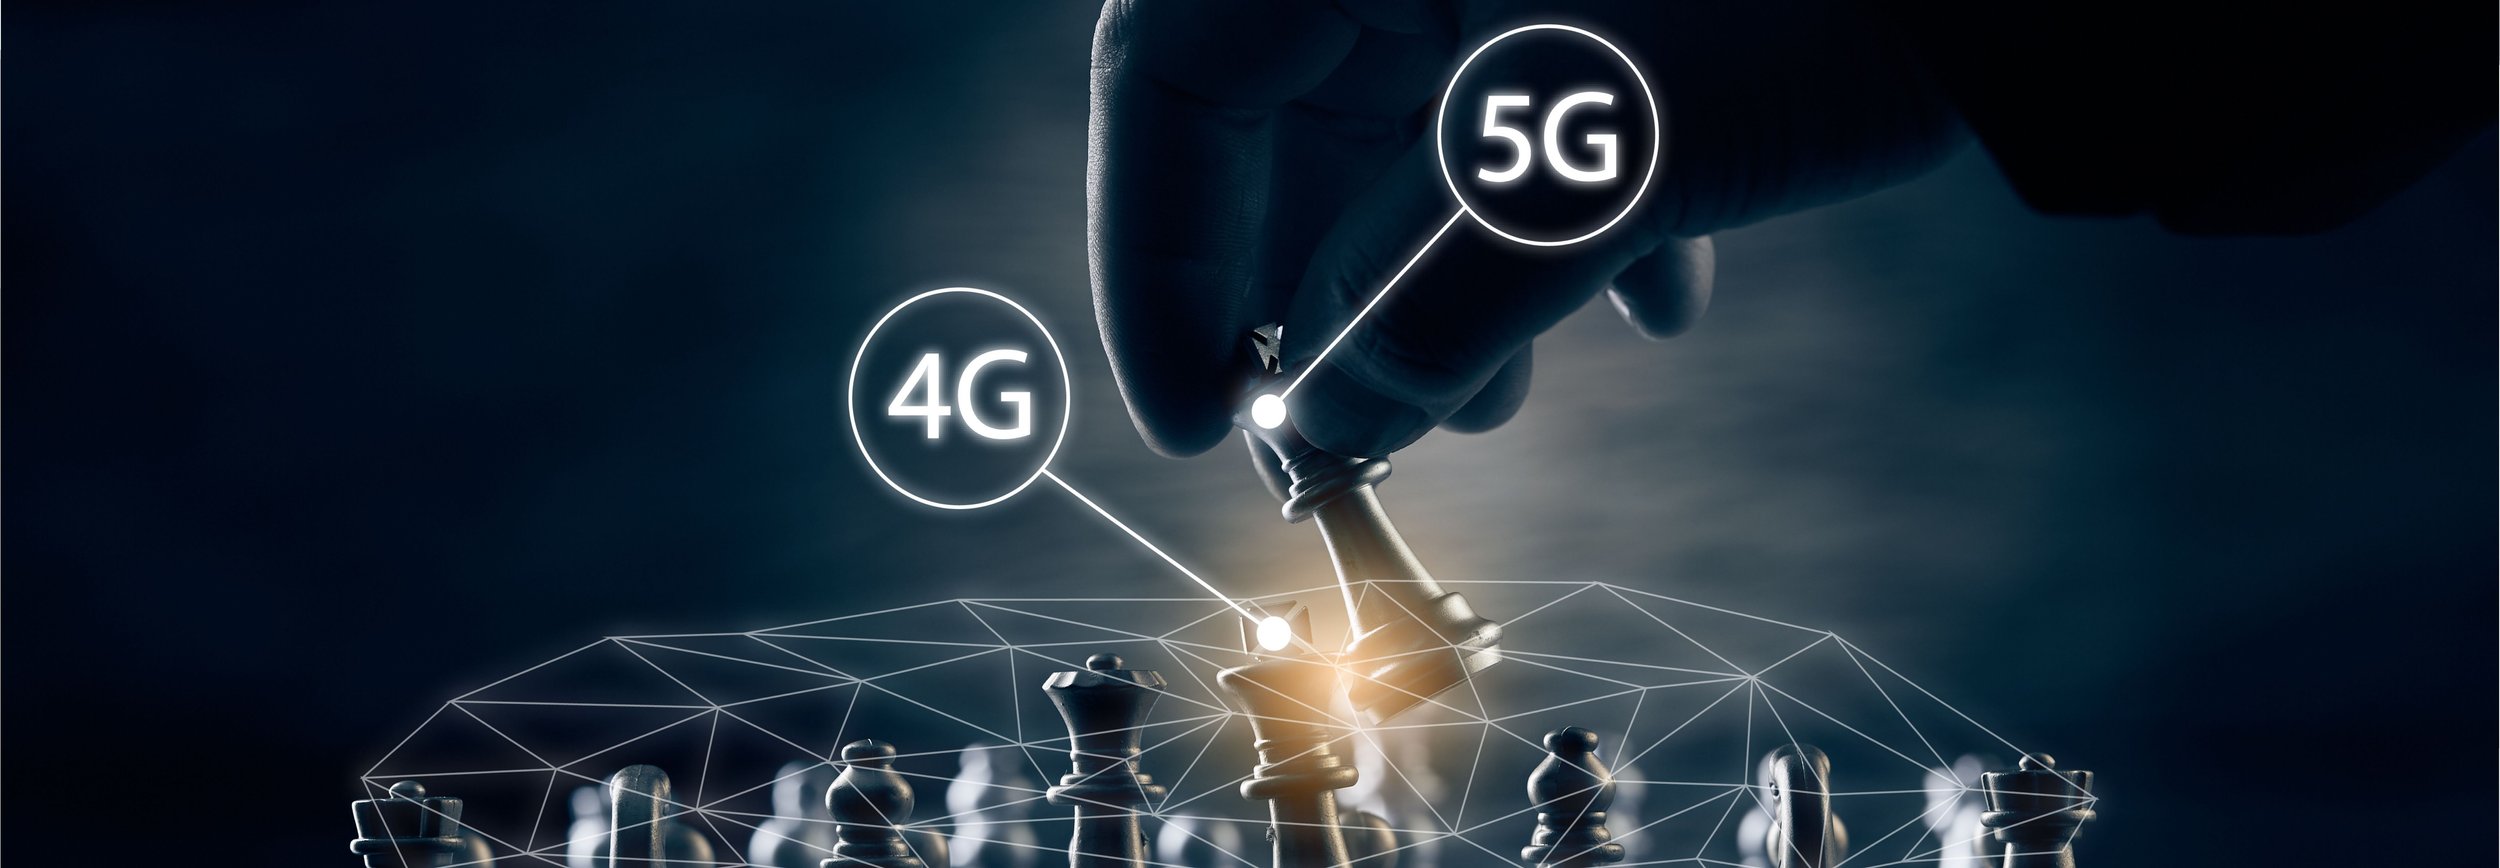 The transition from 4G to 5G Network | Blog Posts | Lumenci